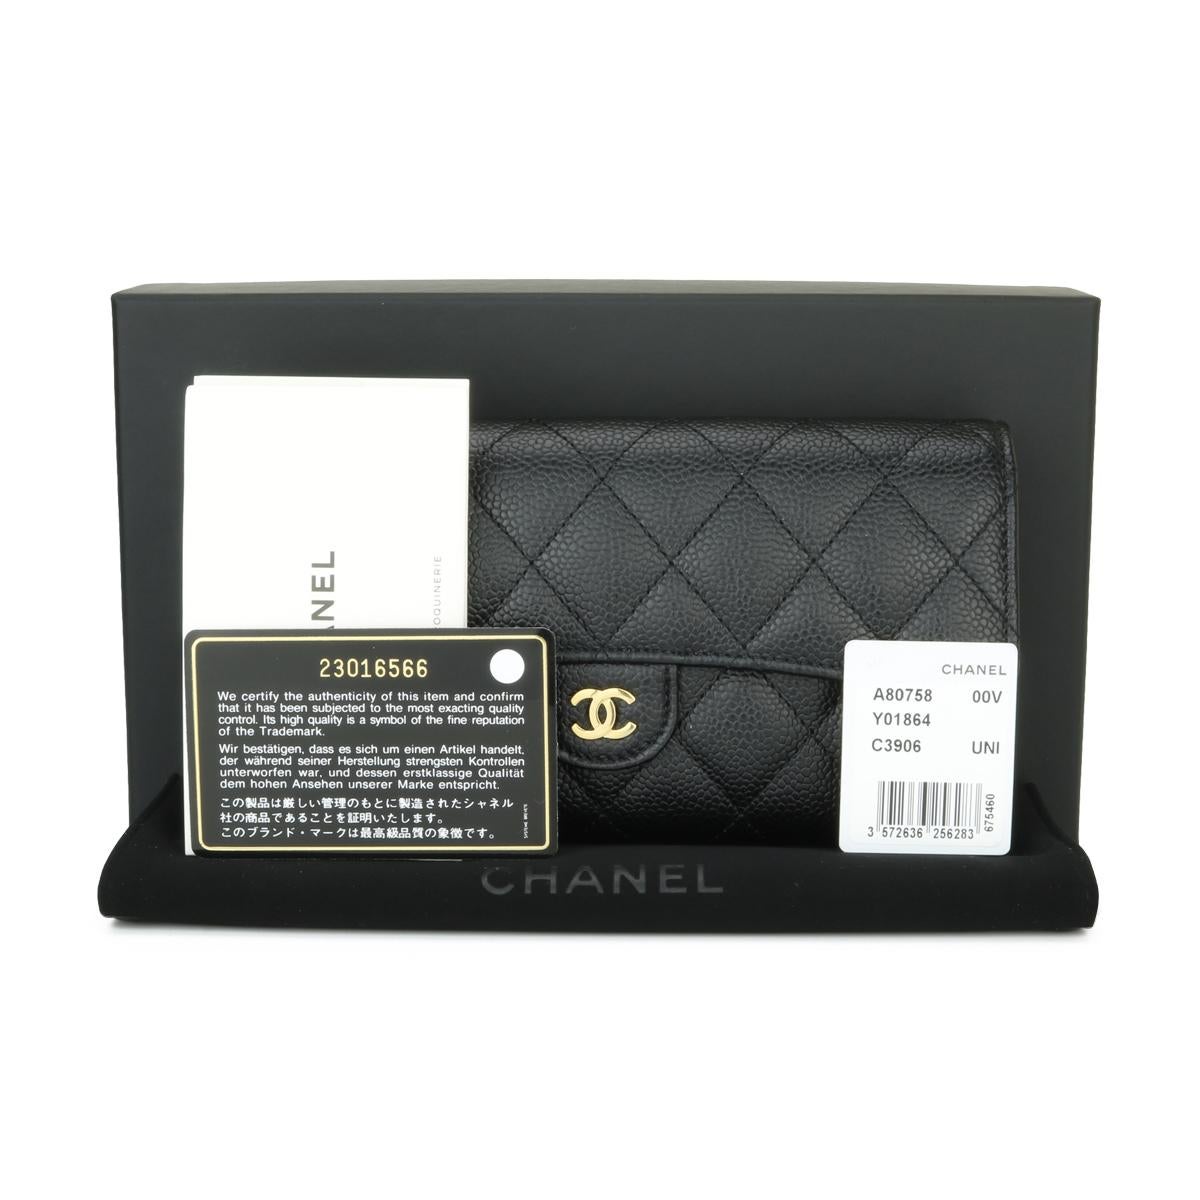 CHANEL Classic Continental Long Flap Wallet Black Caviar with Gold Hardware 2017.

This stunning classic long flap wallet is in never worn condition, the wallet still holds its original shape, and the hardware is still very shiny.

- Exterior